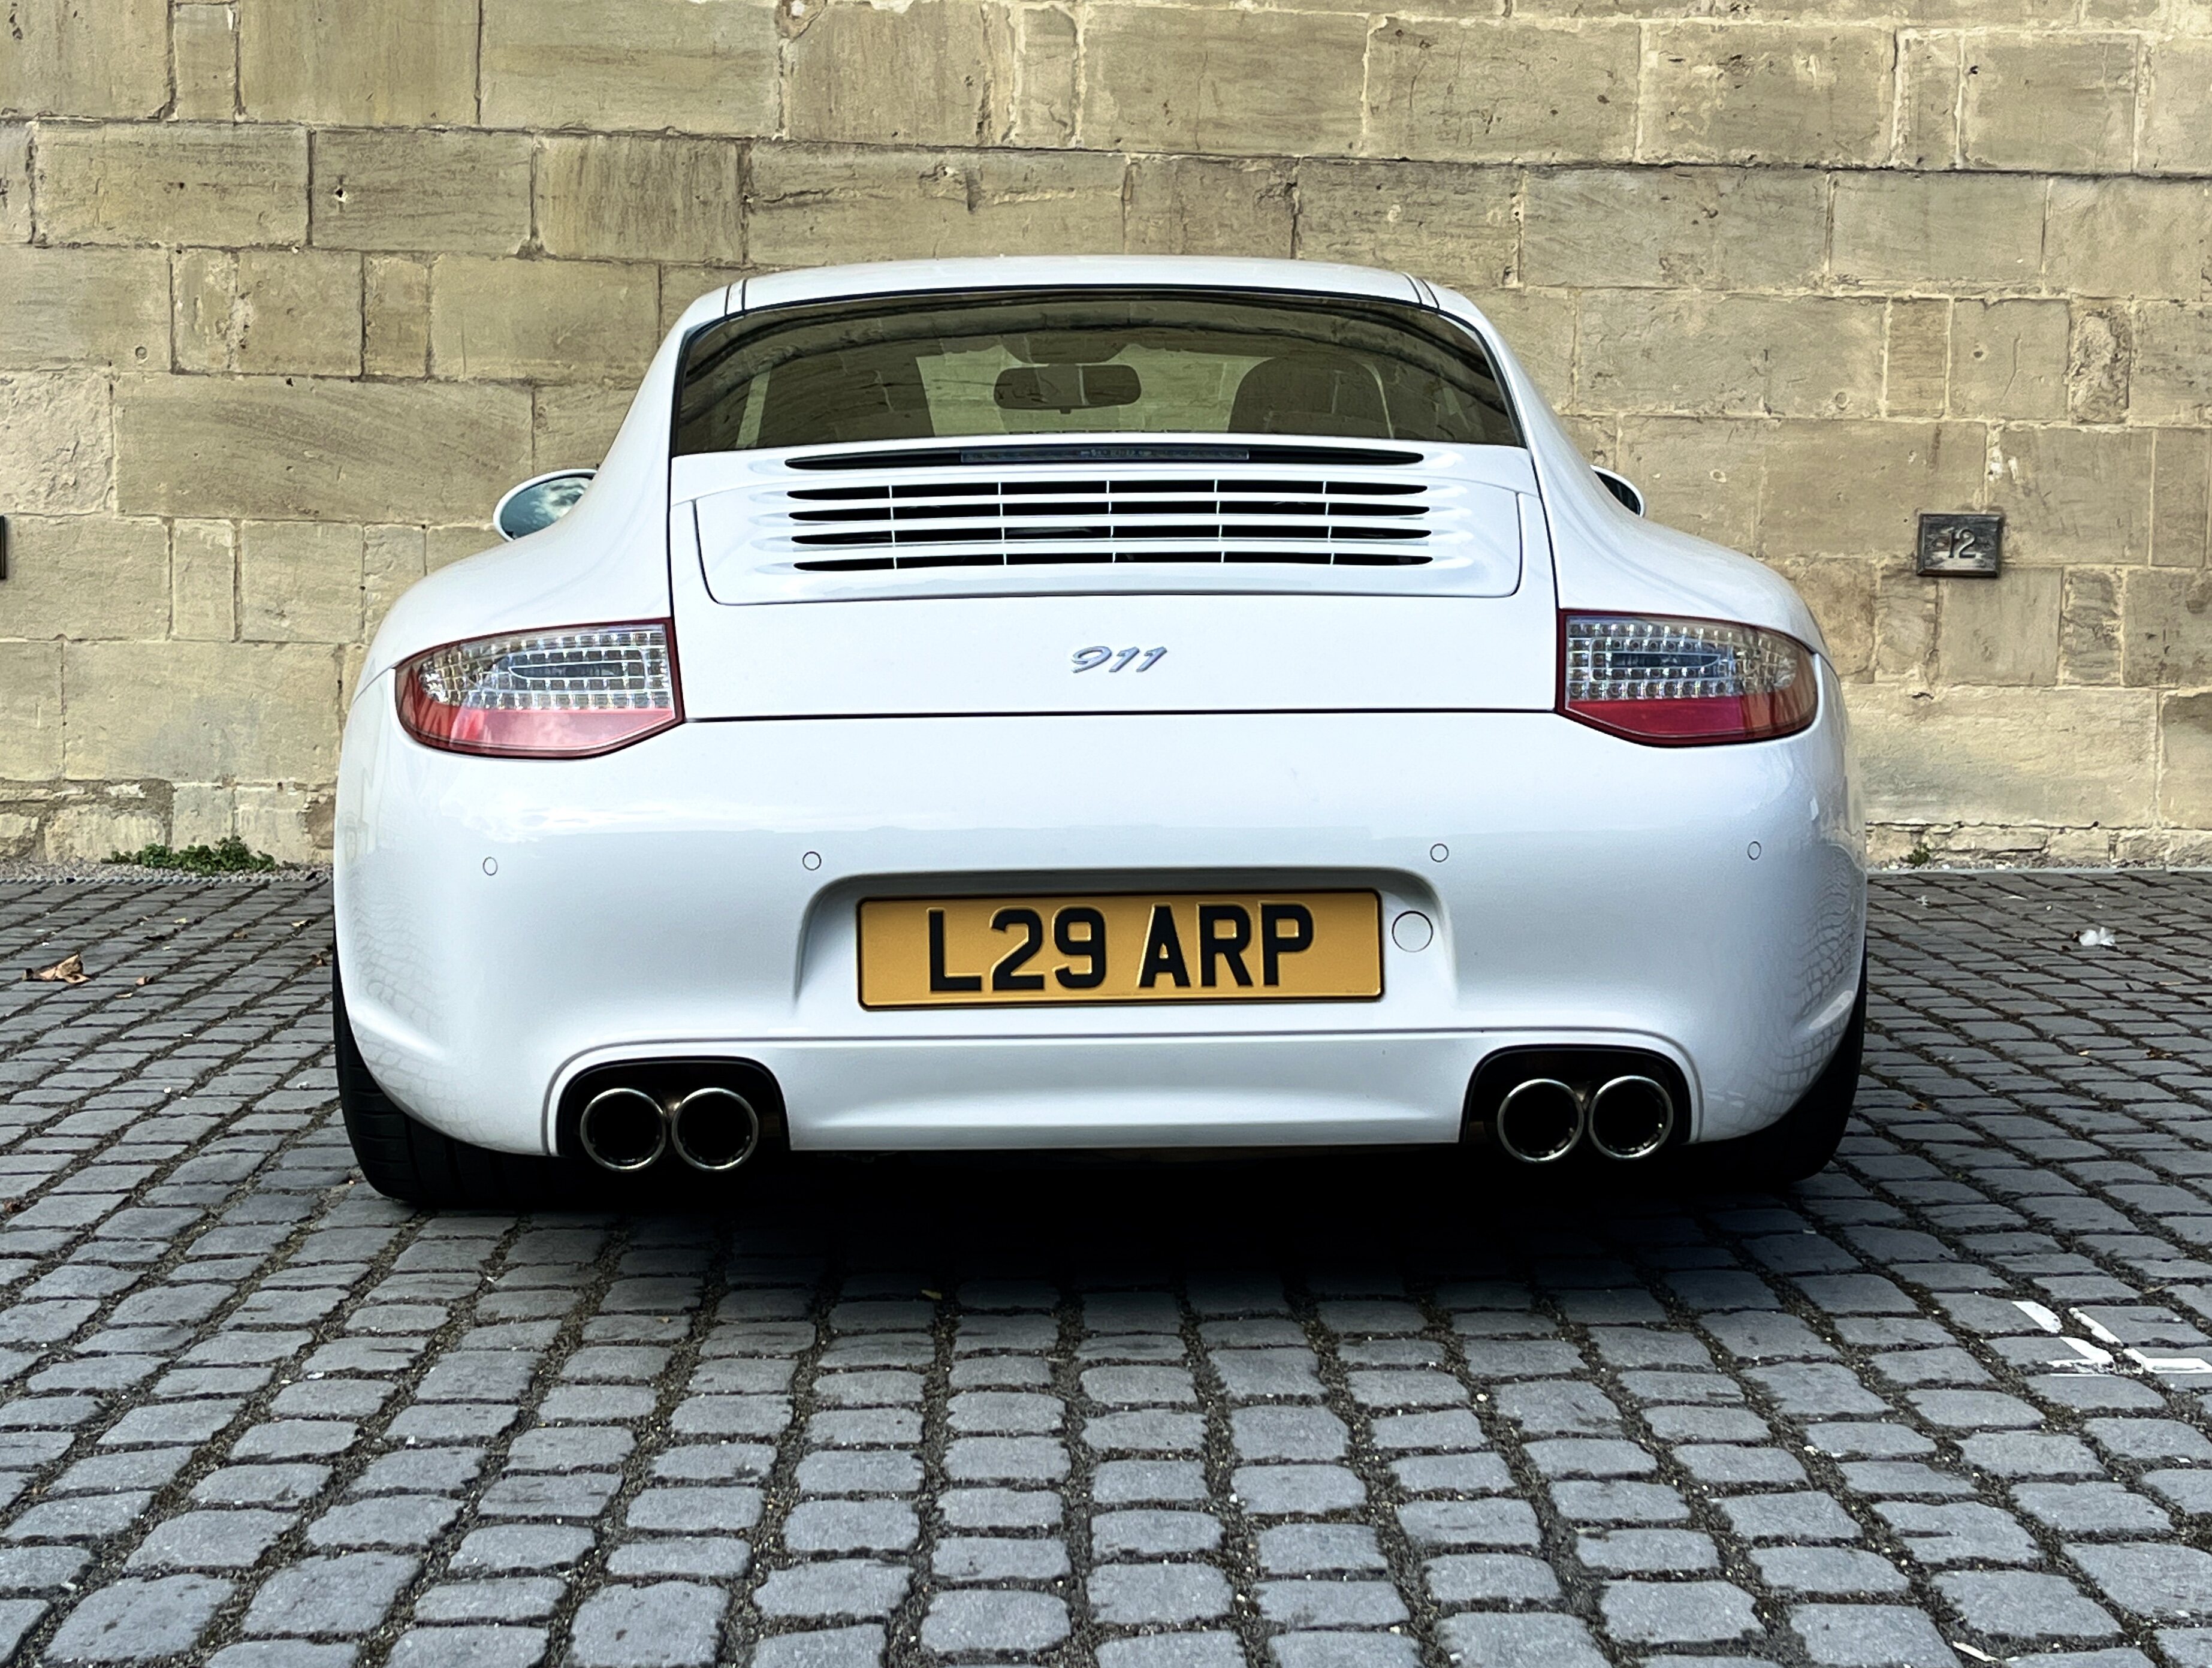 Pistonheads - The image depicts a white sports car parked on the side of a street. The car is positioned at an angle, showcasing its sleek design and the license plate that reads "L26 ARP." There's a clear view of the rear side of the vehicle where the exhaust pipes are visible. The setting appears to be urban, with cobblestone pavement and a building in the background. The overall image gives off a sense of luxury and high-performance vehicle.